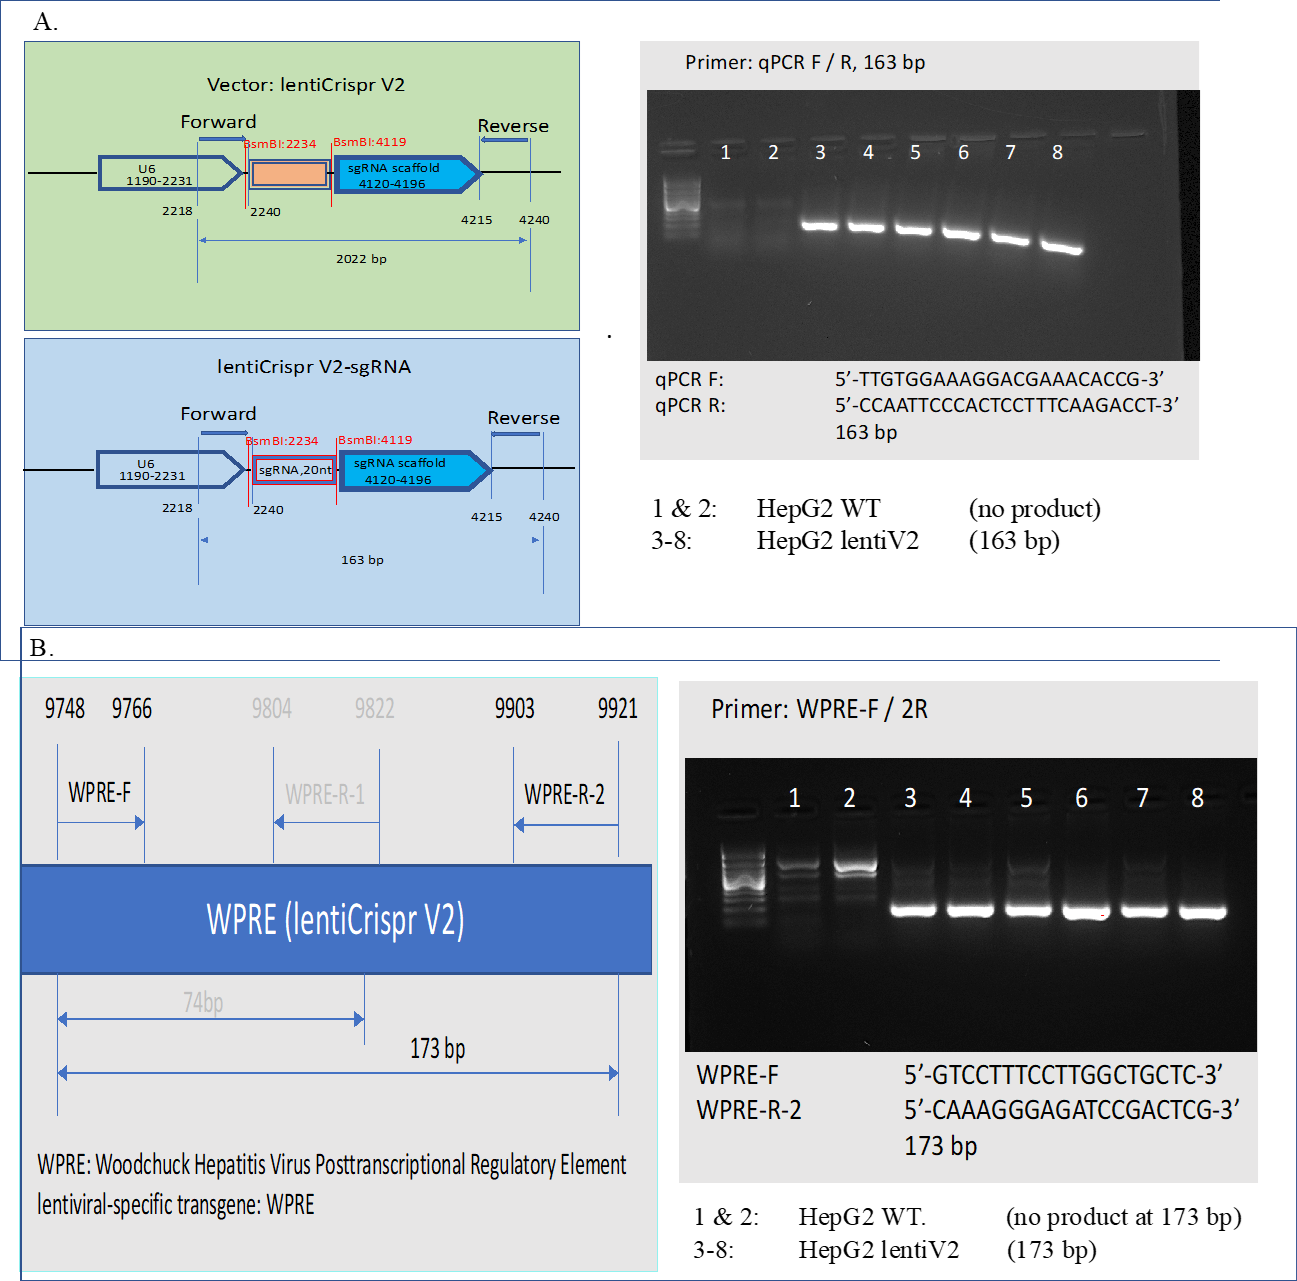 Figure 10: Verification of sgRNA cassette and lentiV2 transgene. A. 20nt sgRNA cassette was verified in lentiV2 transduced genomic DNA population, 163 bp PCR product obtained, while WT HepG2 didn’t possess the cassette, thus, no PCR product. B. lentiviral-specific transgene WPRE was verified in lentiV2 transduced genomic DNA population, while no transduced WT didn’t have the transgene, therefore, no 173 bp PCR product observed. 